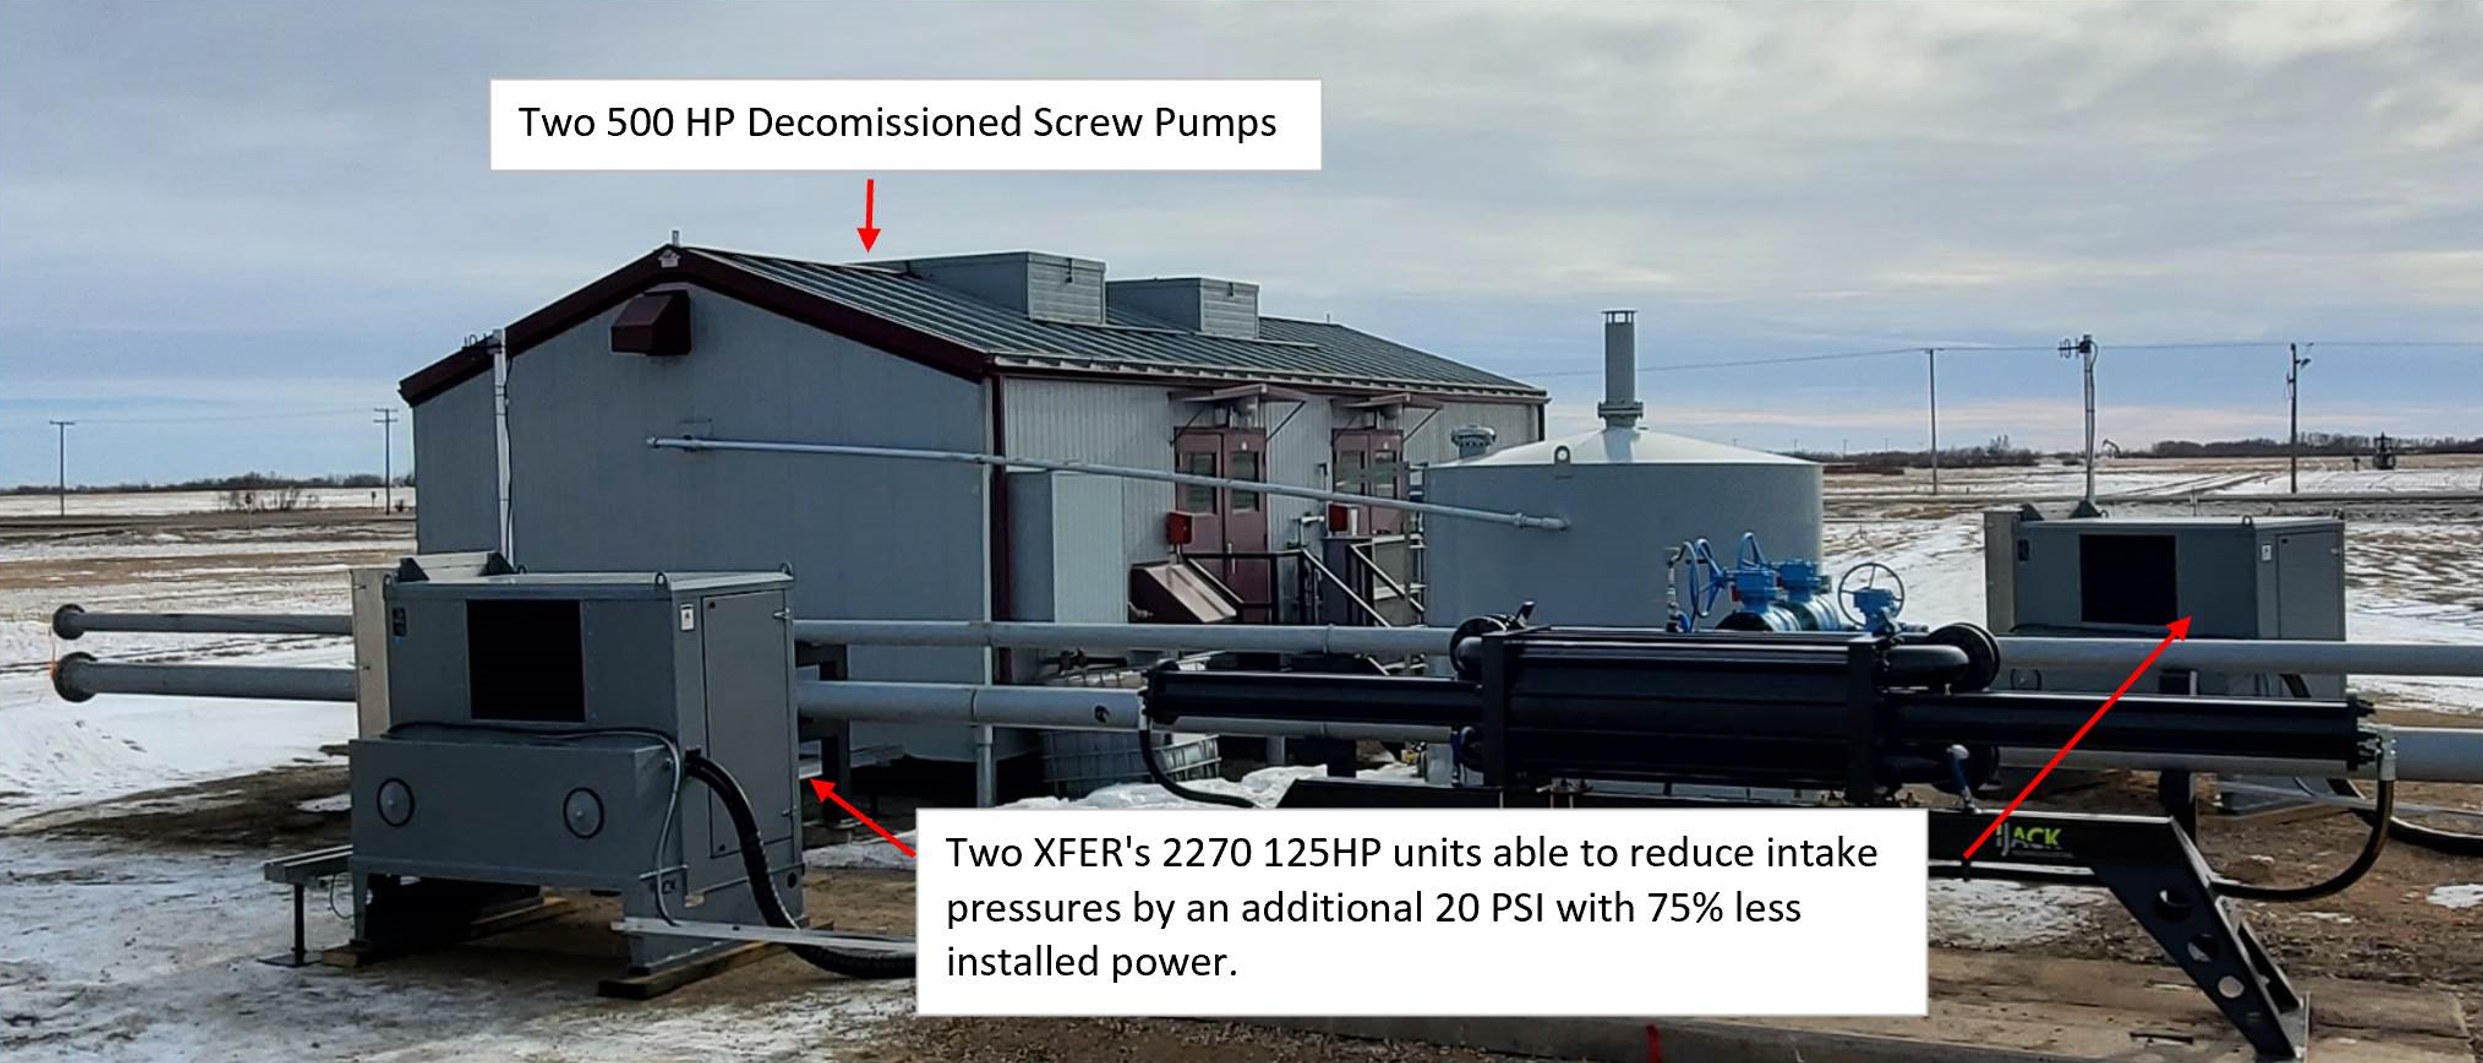 Two IJACK XFER 2270 125 horsepower pumps reduce intake pressures by 20 PSI with 75 percent less installed power